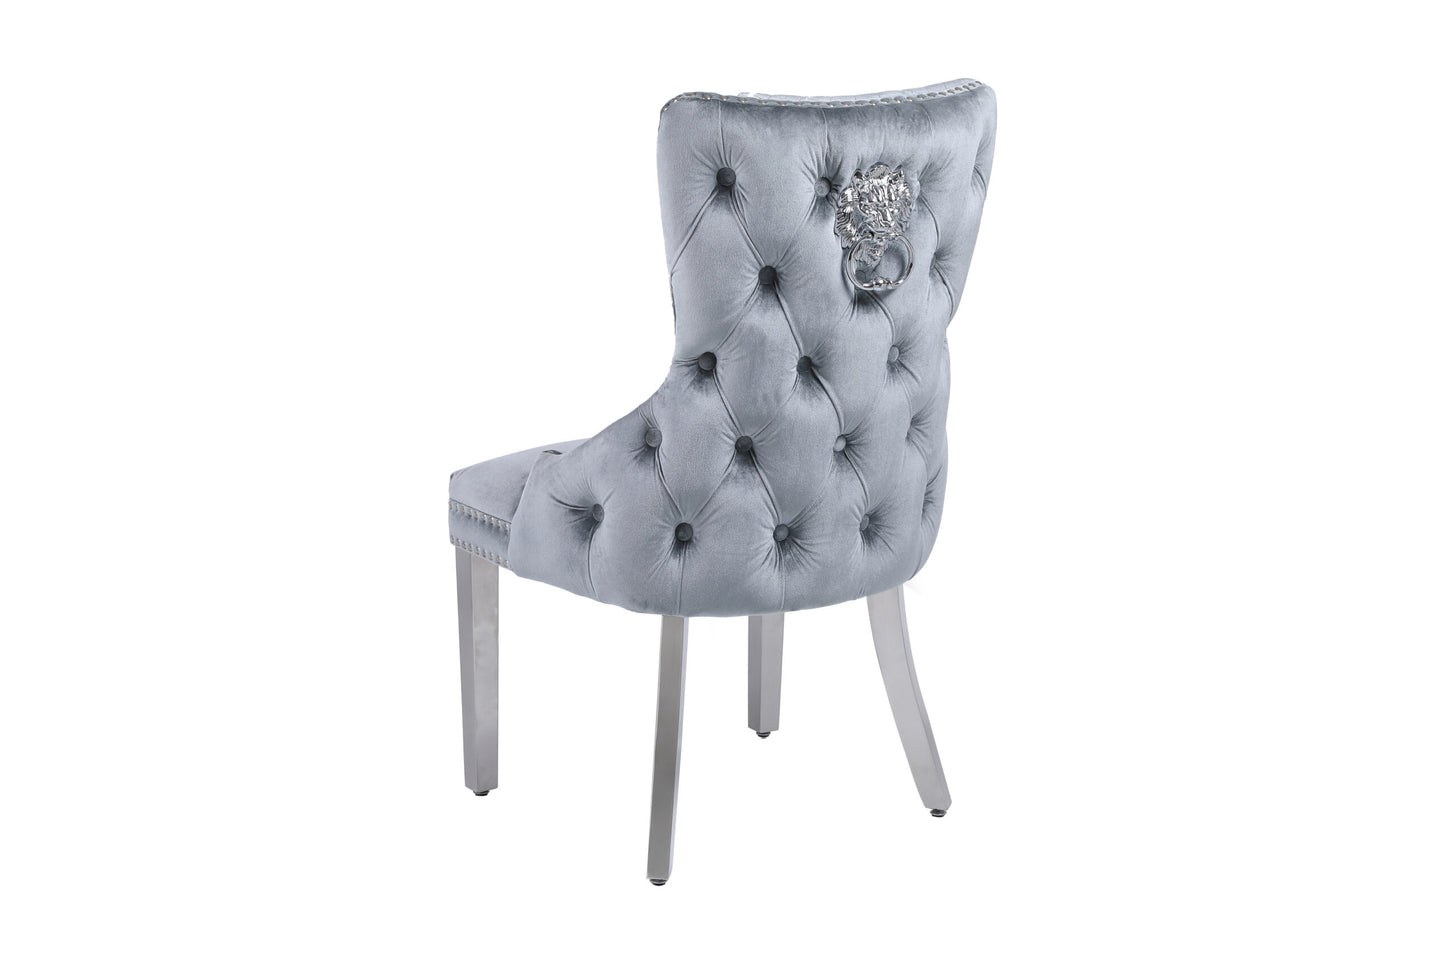 Victoria Velvet Fabric Dining Chair in Grey Silver Lion Knocker Back with Chrome Polished Steel Legs (Set of 2 chairs)